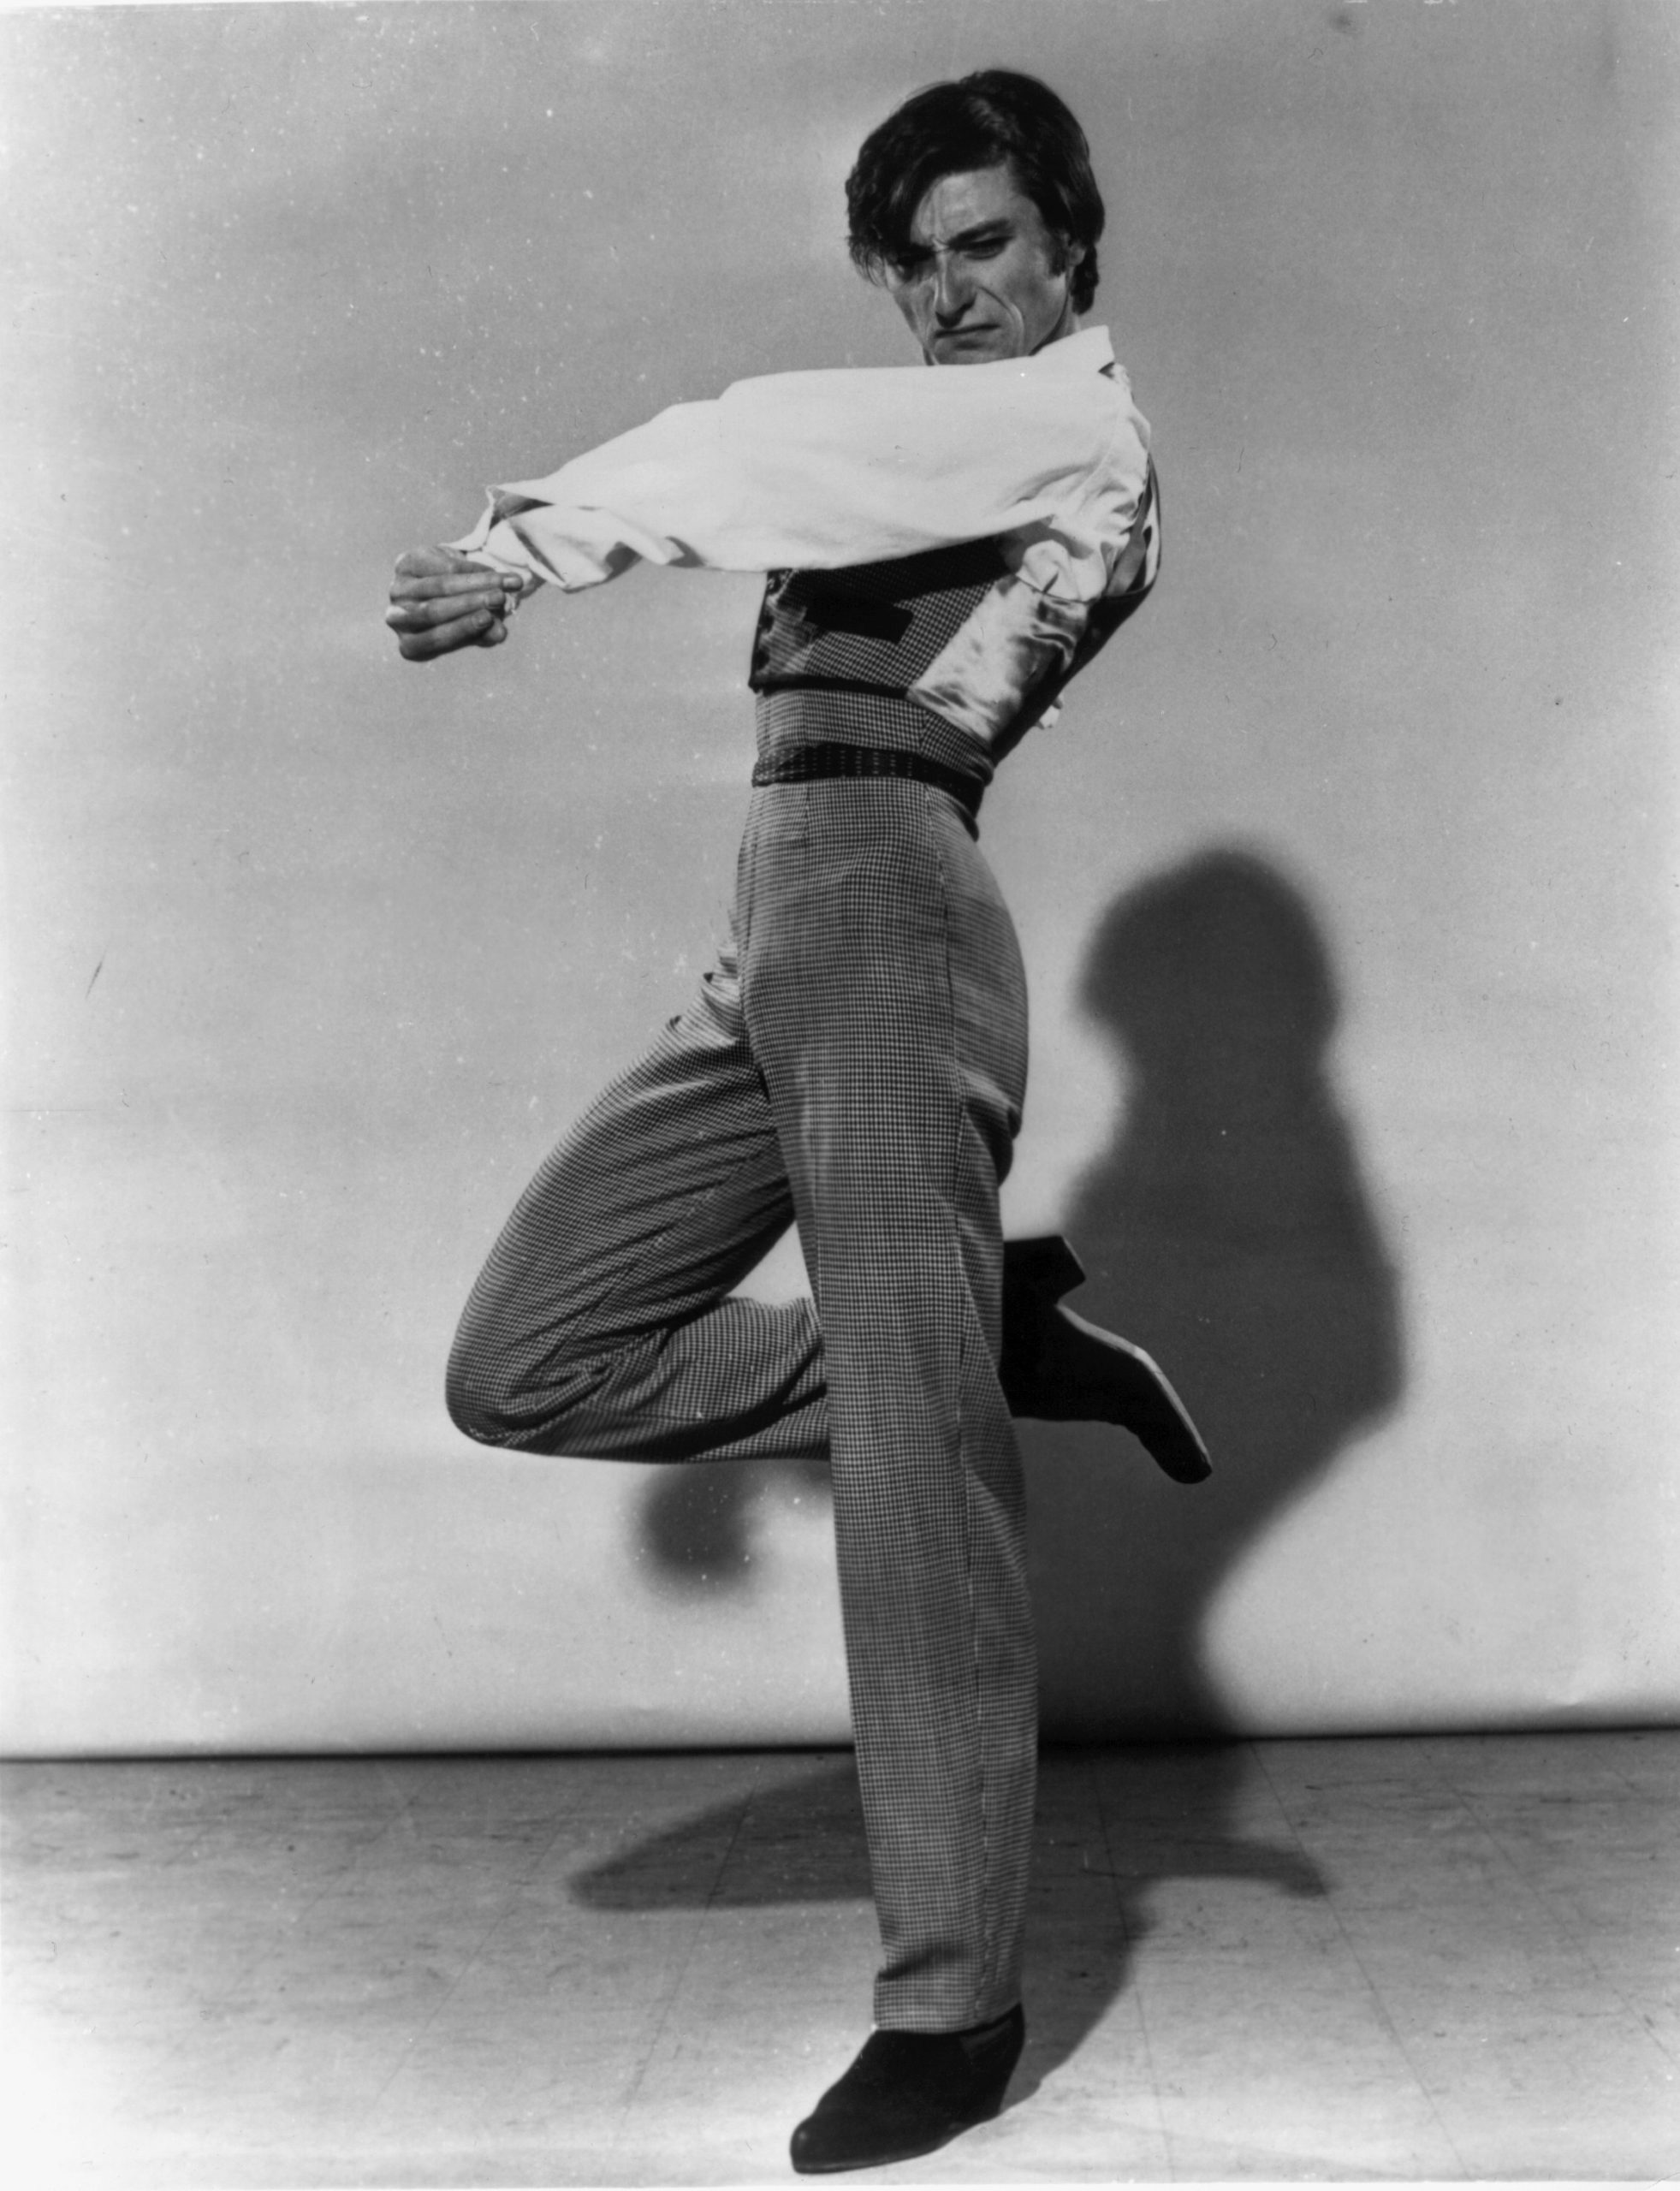 A black and white photo of a male Flamenco dancer, lifting his right leg and twisting his upper body with a passionate expression.